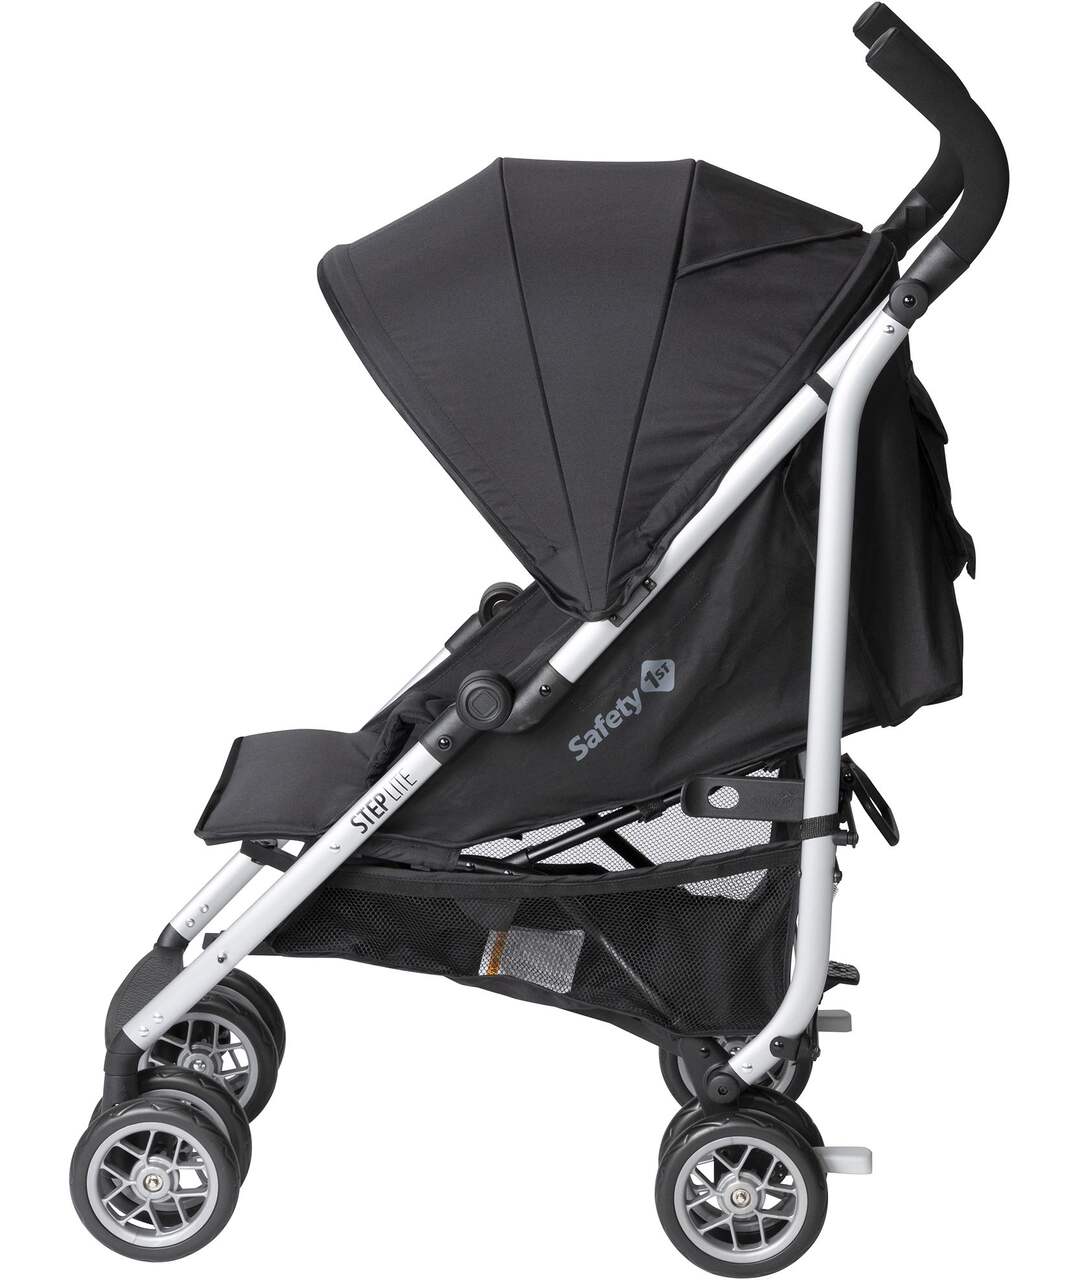 Safety 1st Step Lite Stroller Review - Consumer Reports